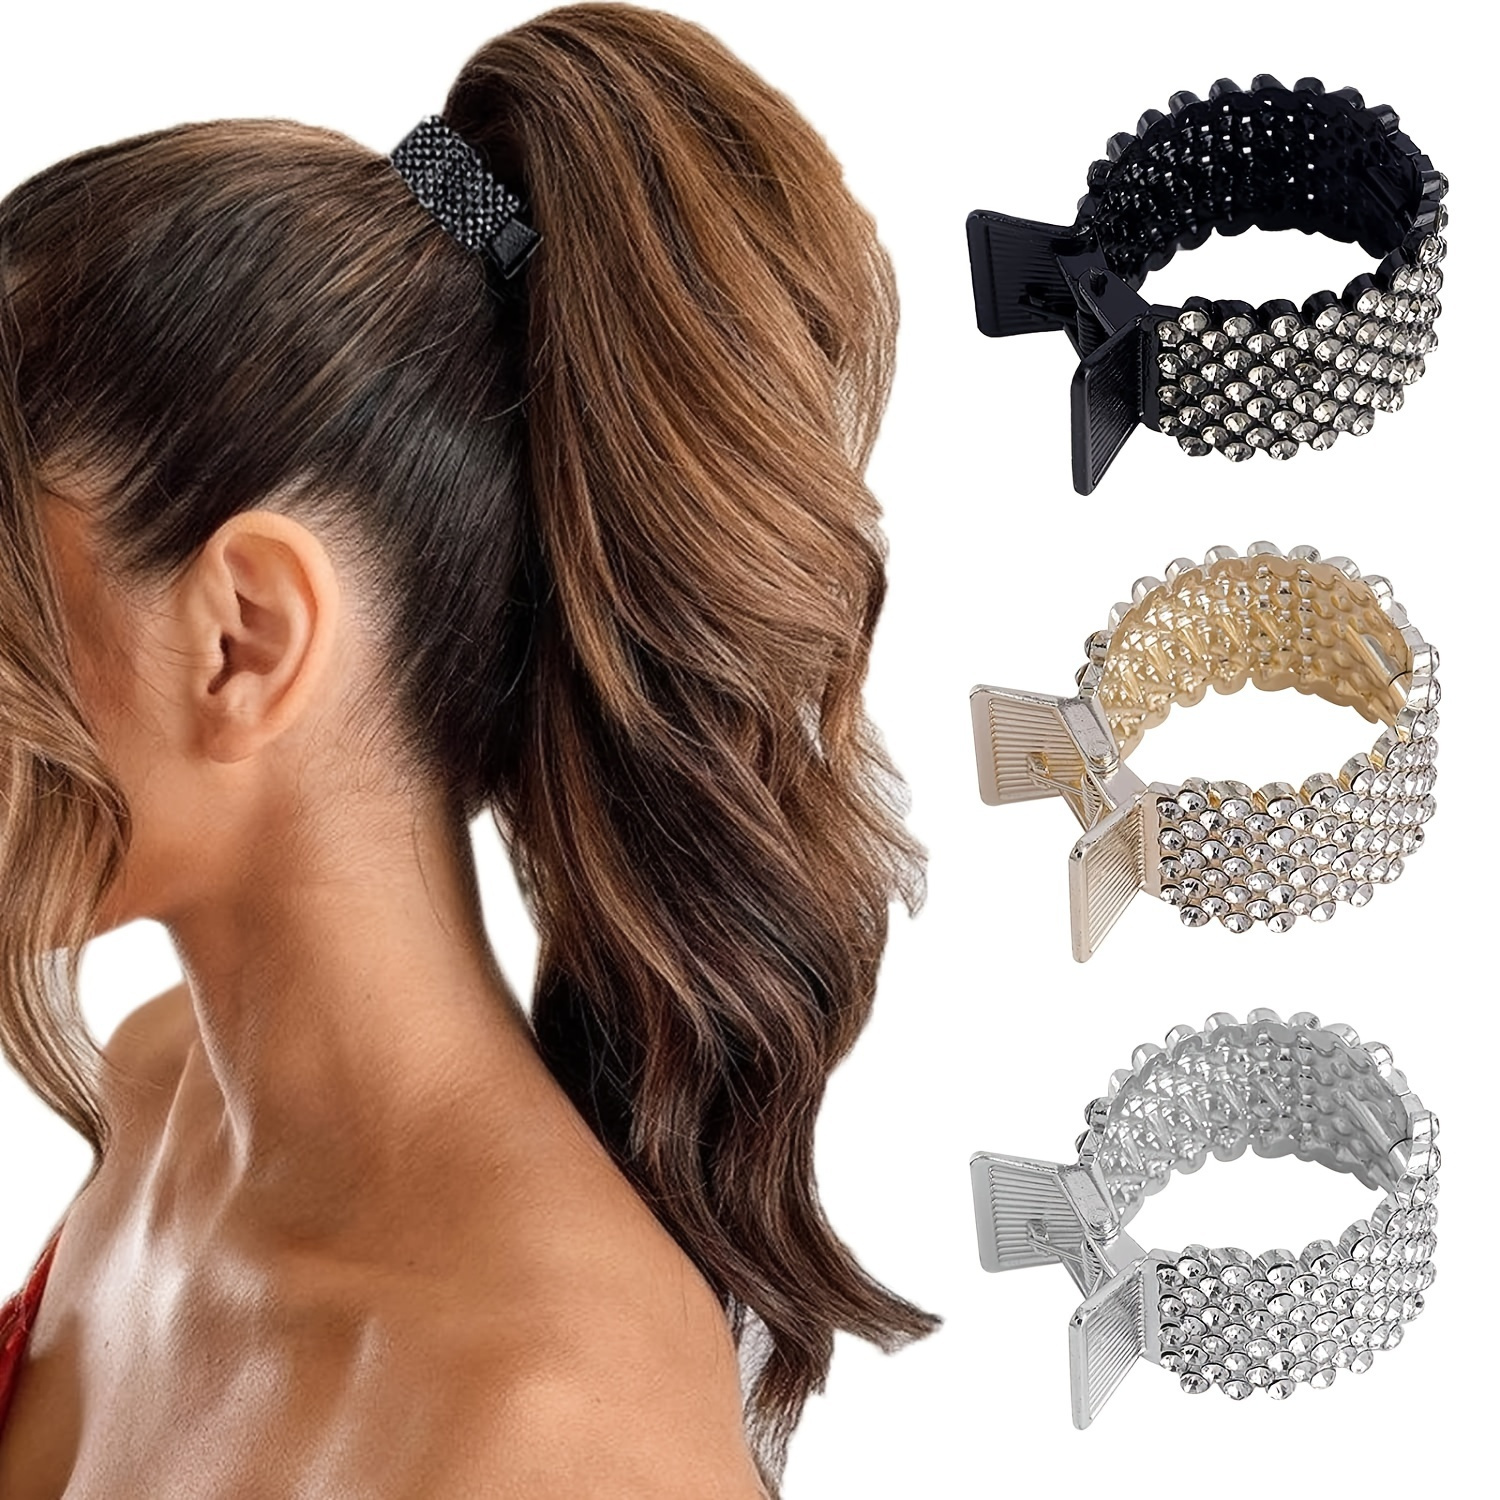 

Elegant Faux Pearl Rhinestone Hair Clips For High Ponytail - Small And Medium Sizes For Thin Hair - Perfect For Women And Girls